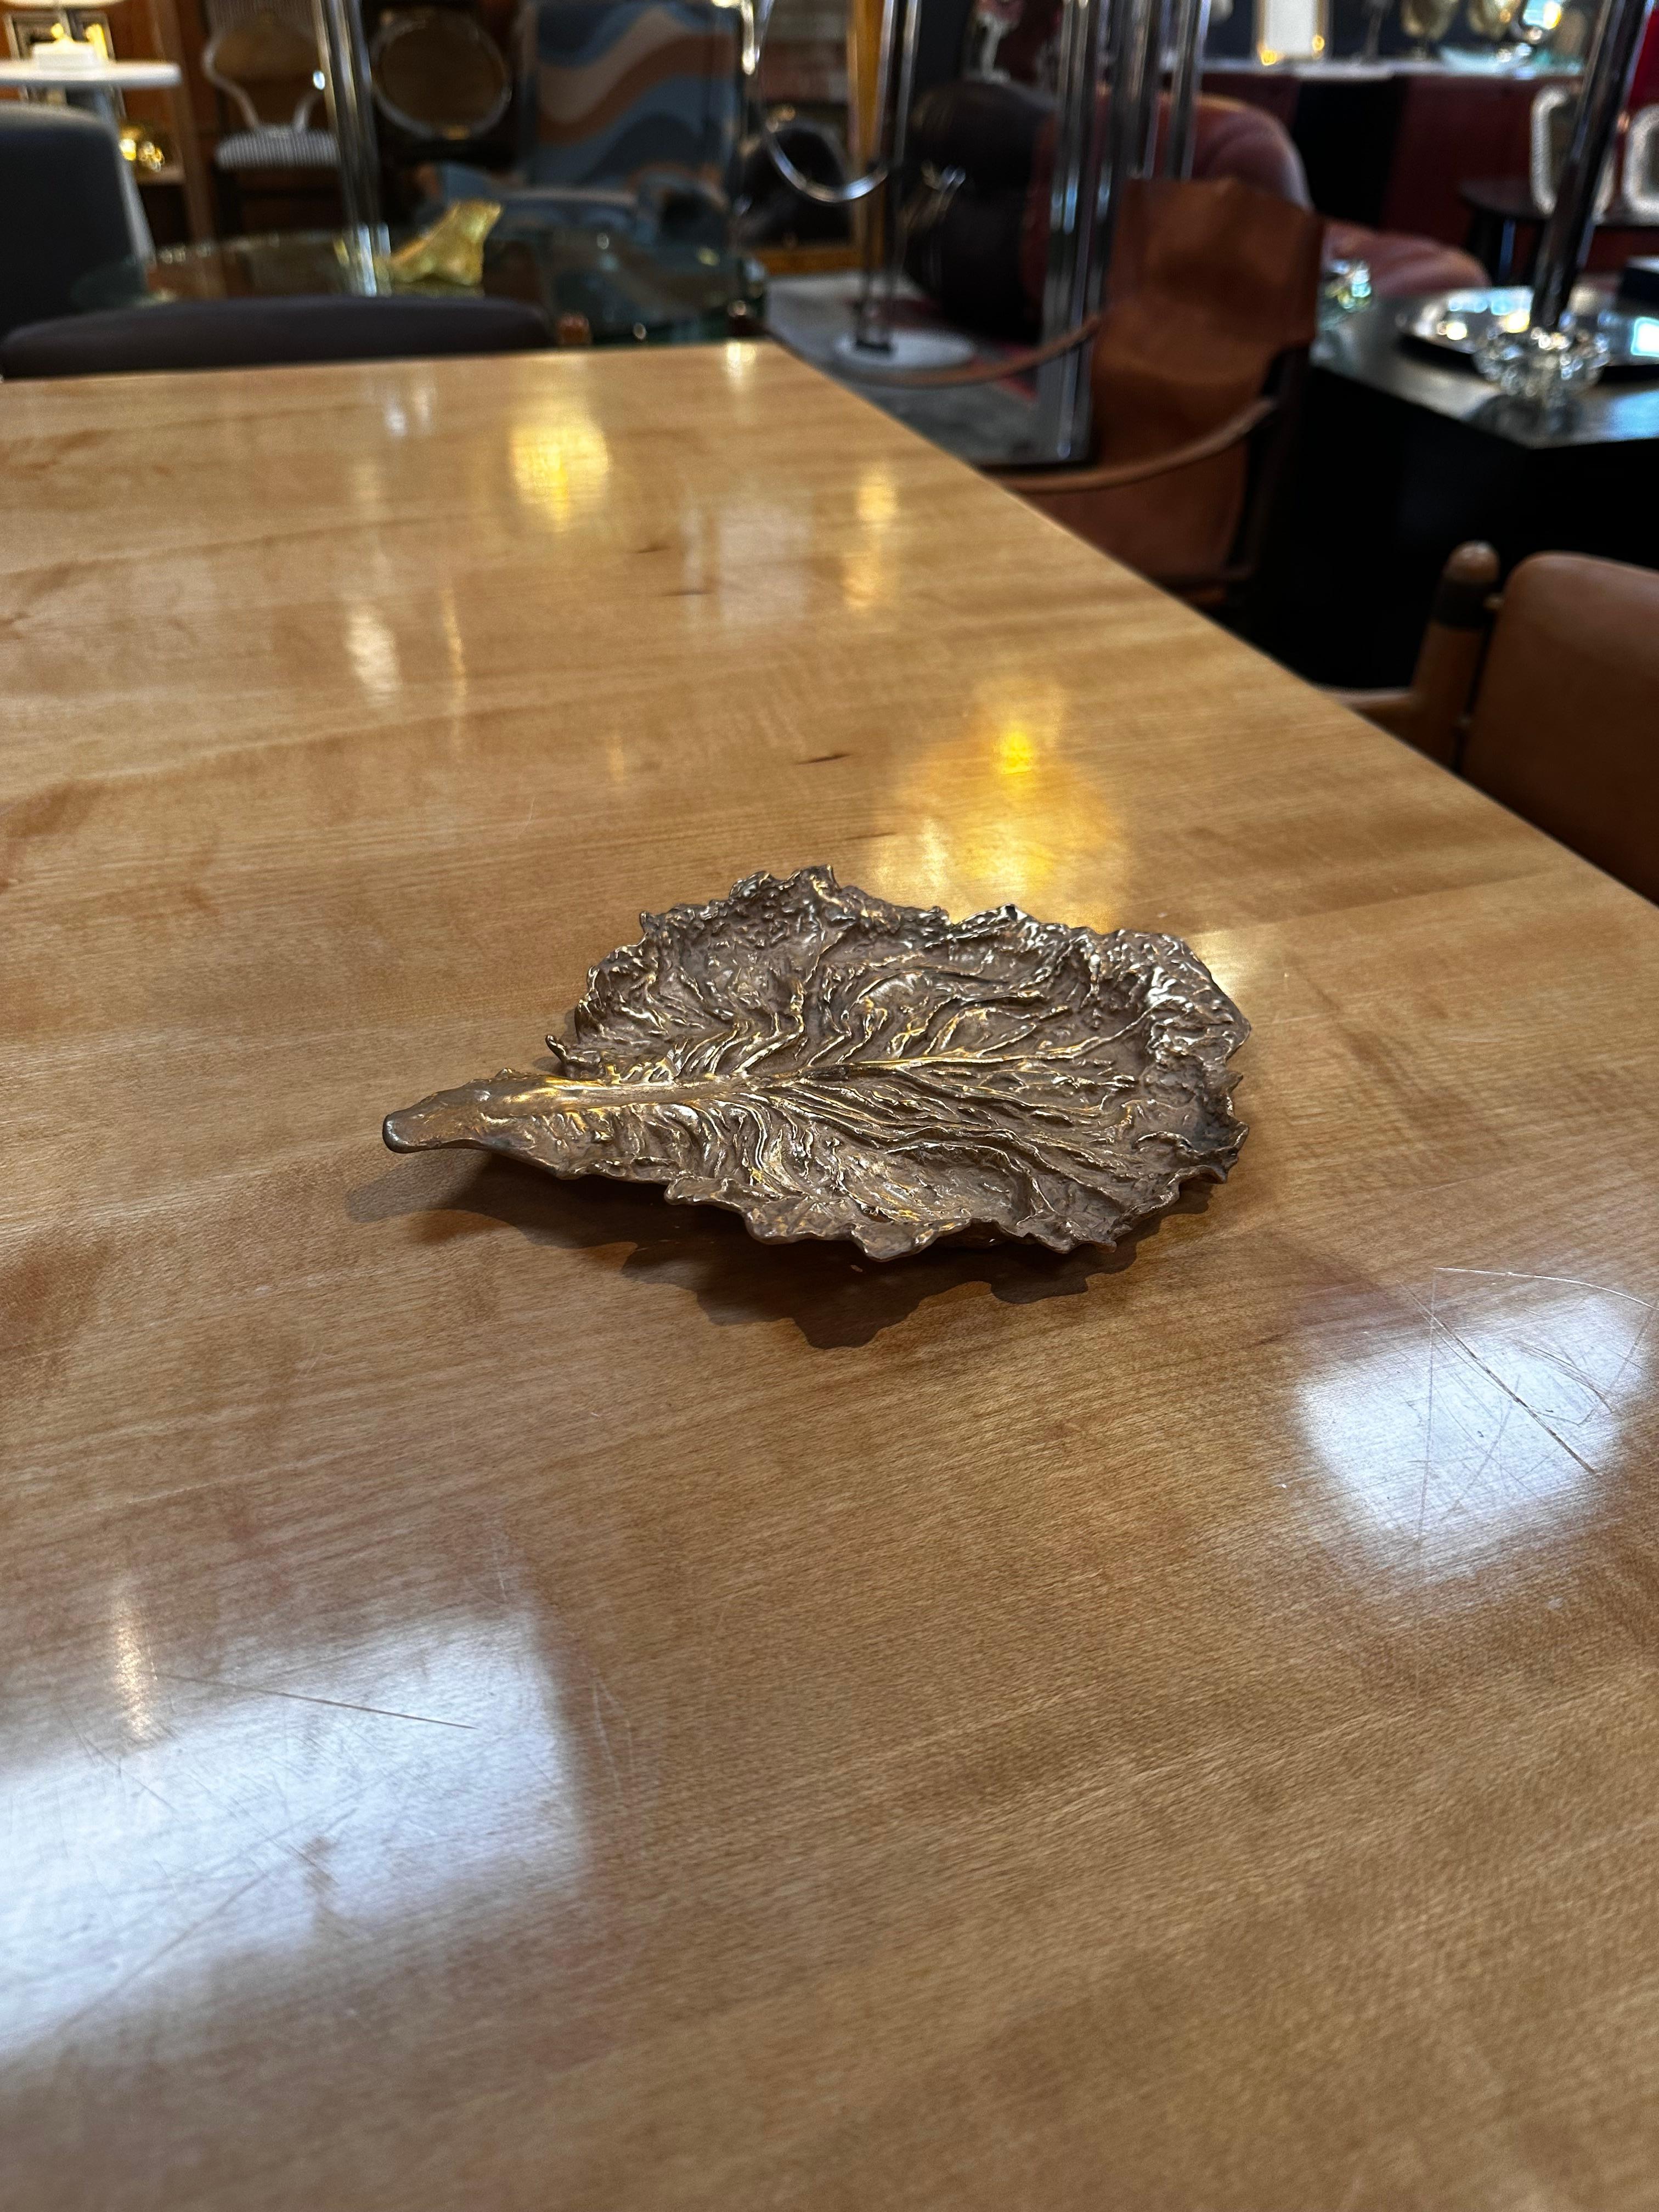 The Vintage Decorative Italian Brass Casting Leaf from the 1960s is an exquisite and nature-inspired decorative piece. Crafted in Italy during the mid-20th century, this brass casting leaf showcases intricate detailing and a timeless design. Its